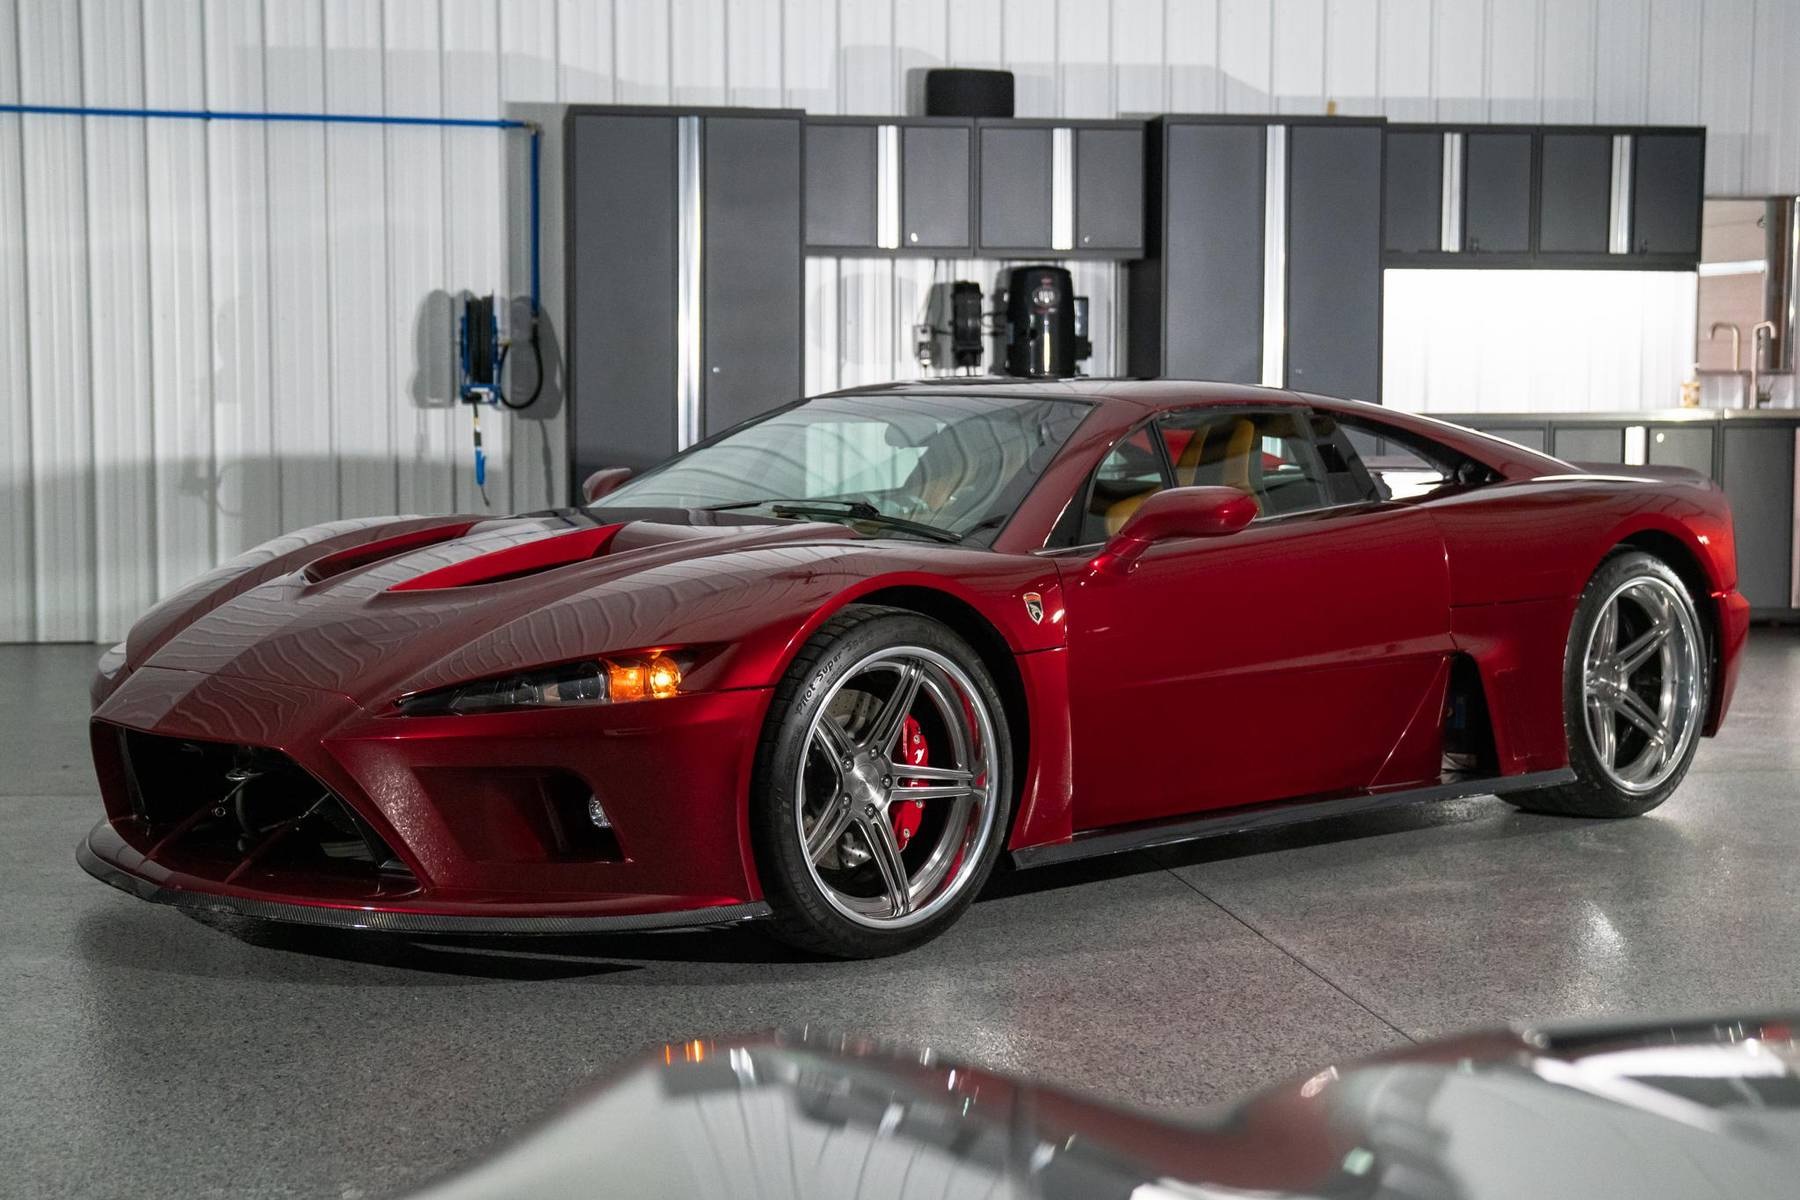 A maroon 2014 Falcon F7 parked in a car garage in front of a silver car